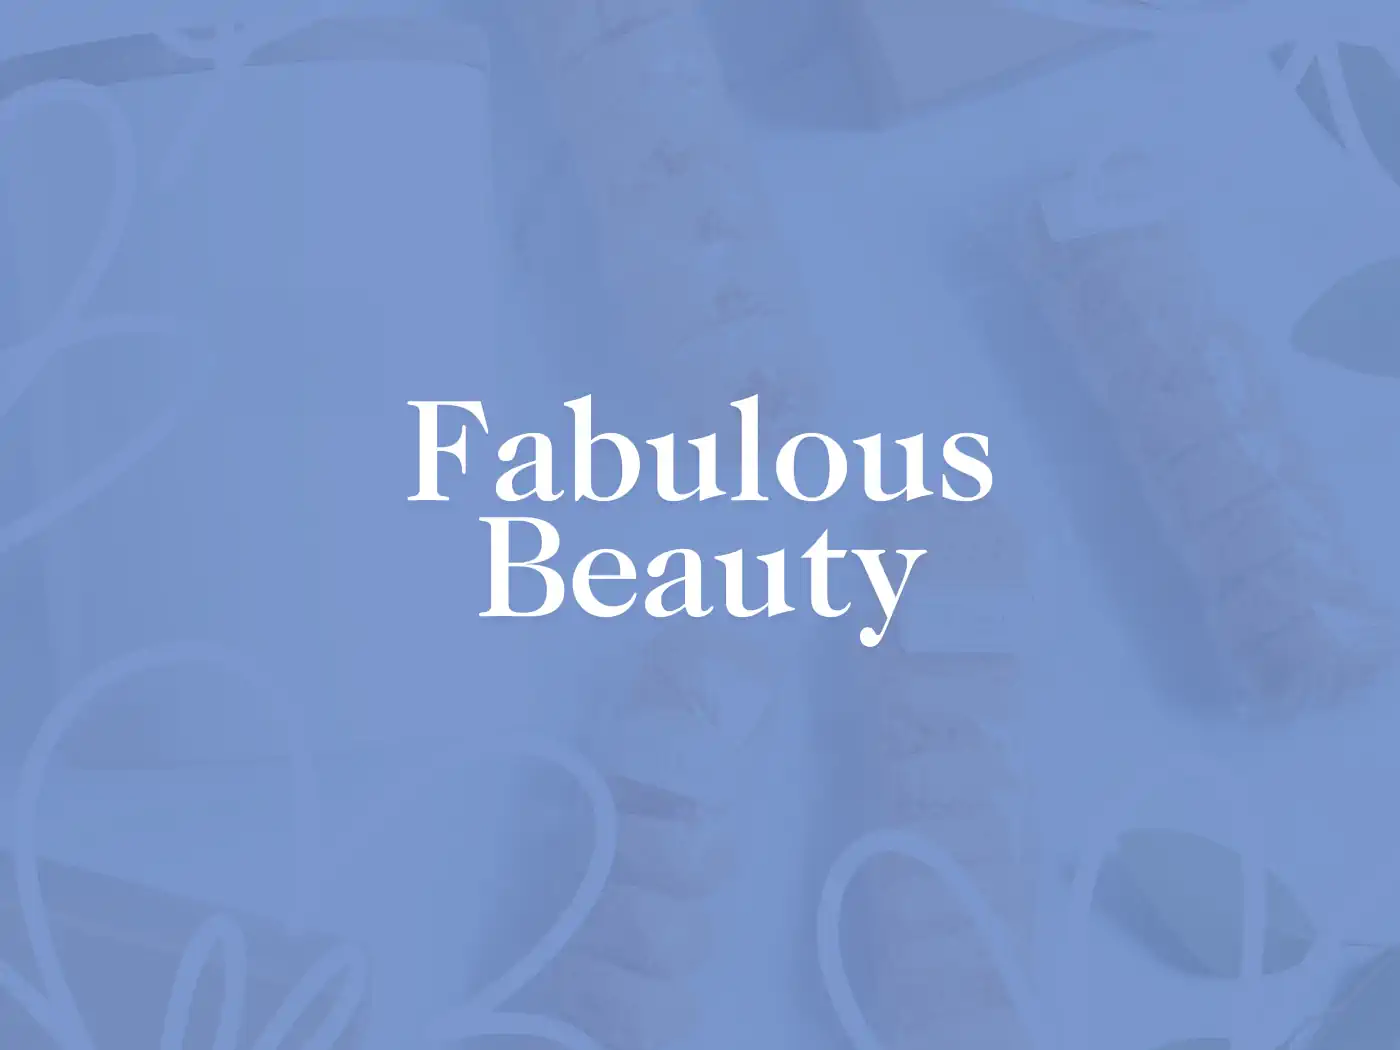 Blue background with the text "Fabulous Beauty" written in white, featuring a serene design with hints of elegance. Fabulous Flowers and Gifts.